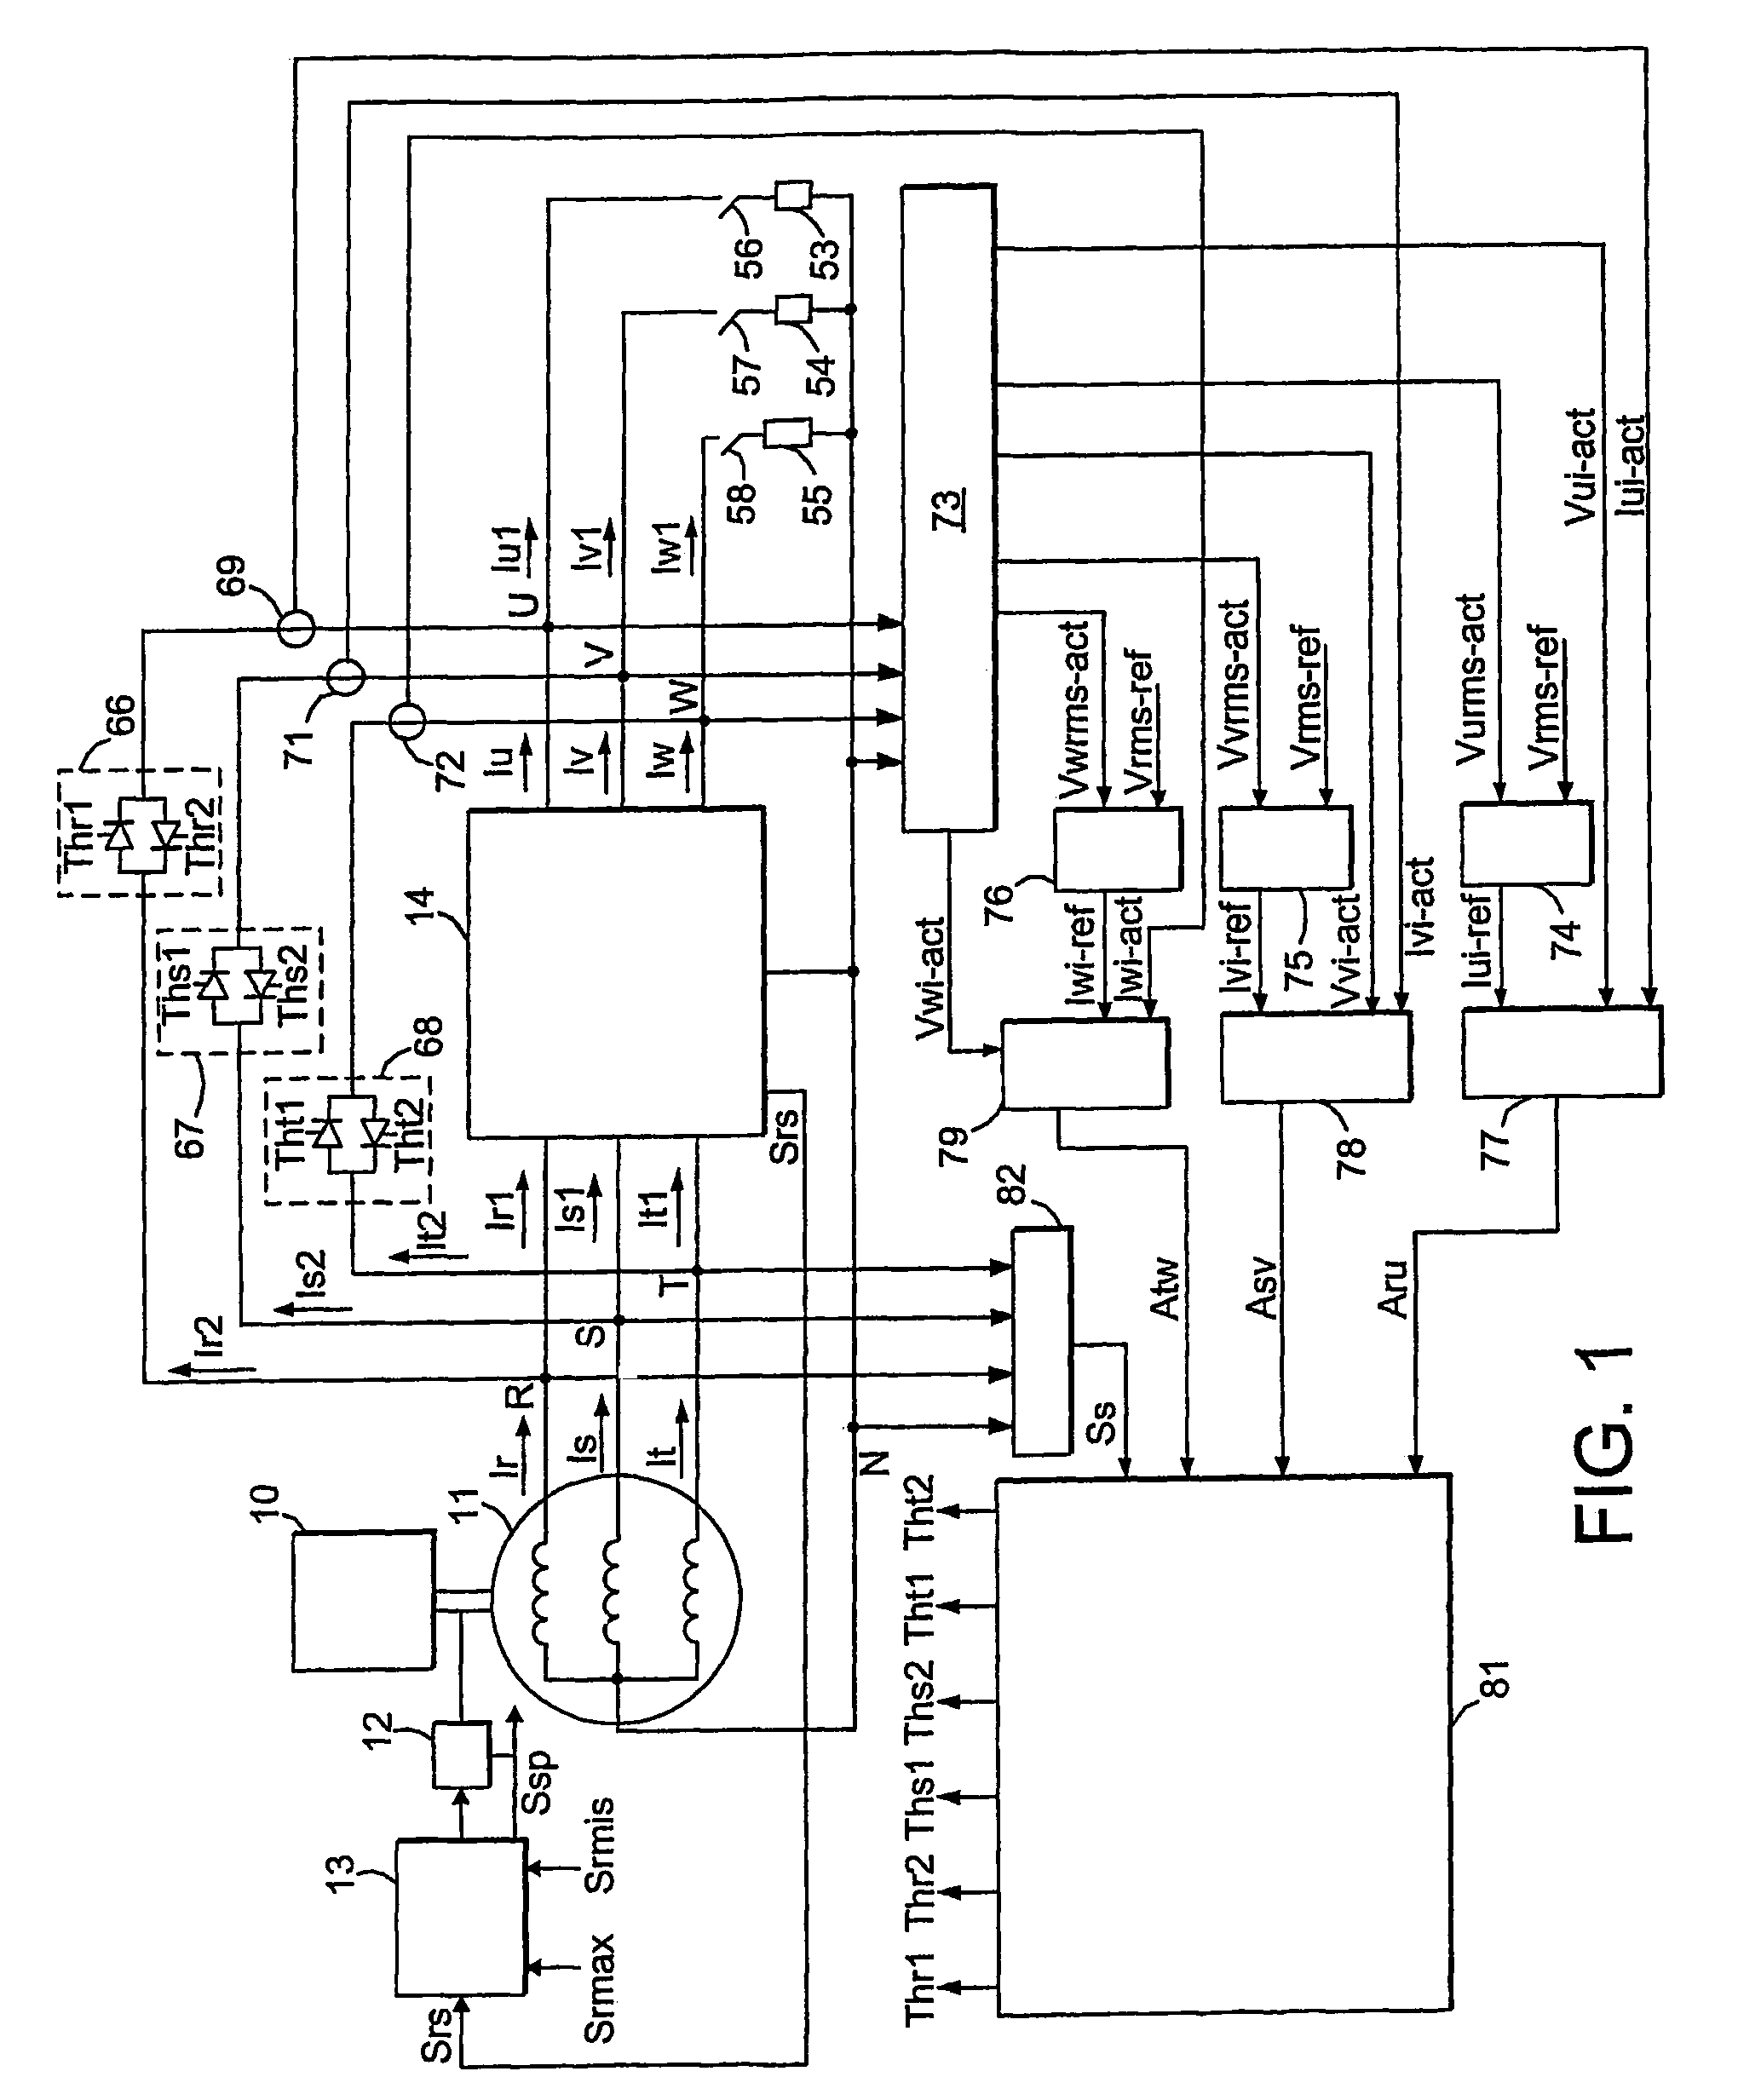 Electrical power supply system and a permanent magnet generator for such a system